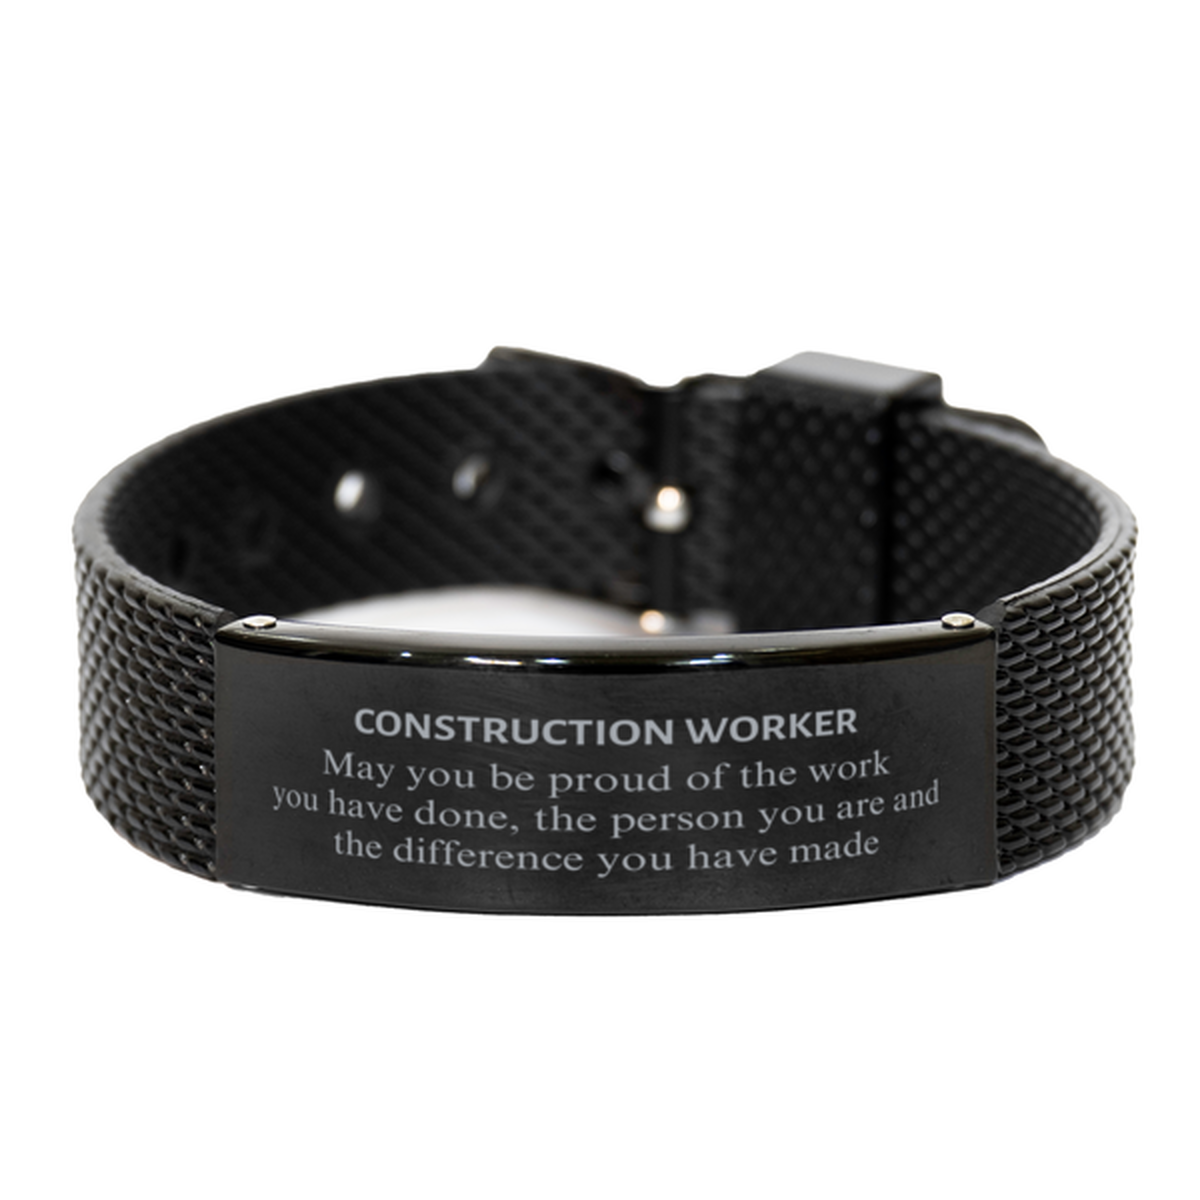 Construction Worker May you be proud of the work you have done, Retirement Construction Worker Black Shark Mesh Bracelet for Colleague Appreciation Gifts Amazing for Construction Worker